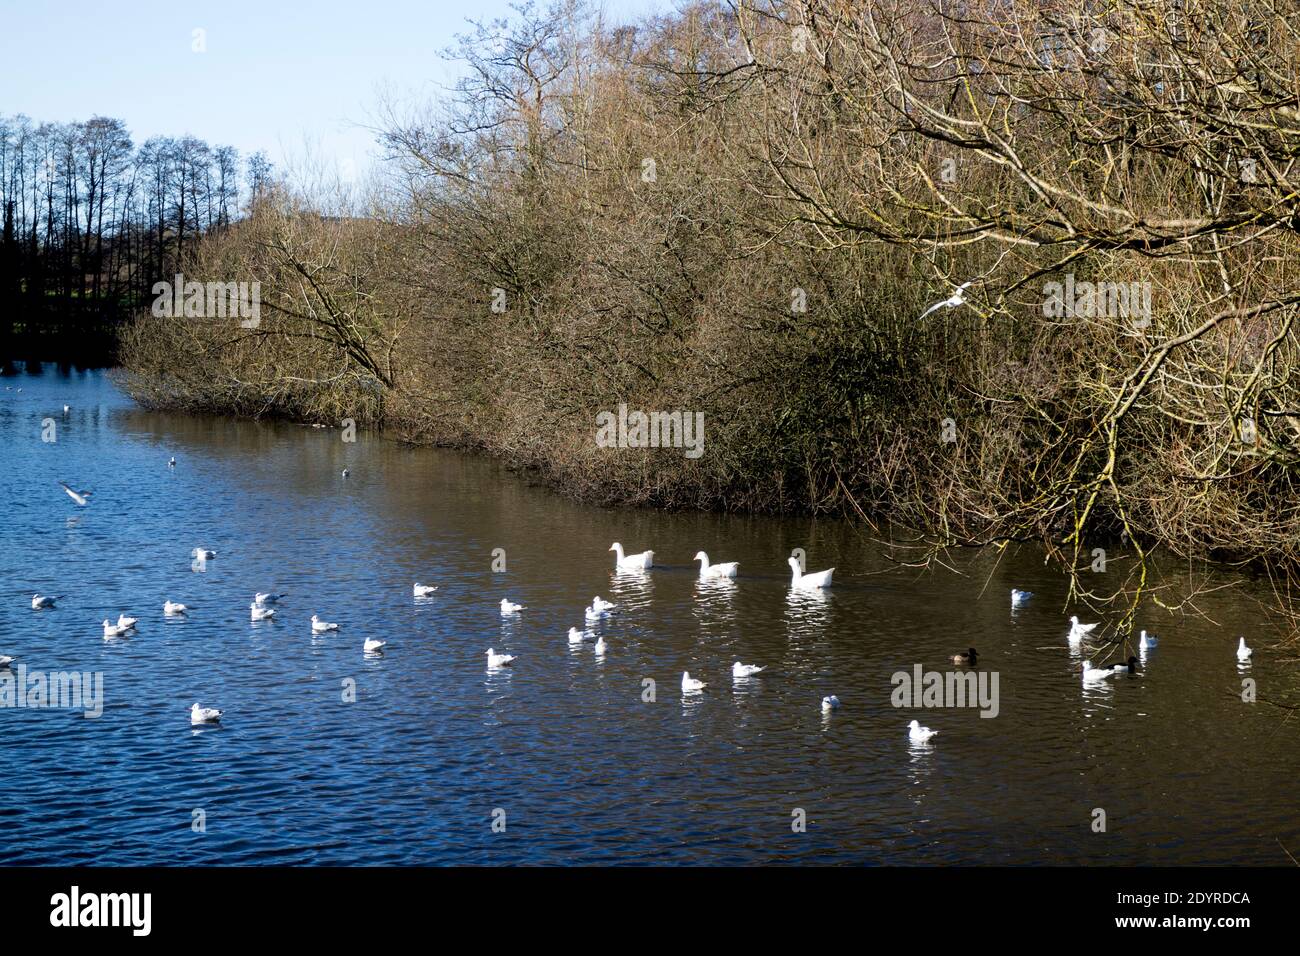 The lake at Hillfield Park in winter, Monkspath, Solihull, West Midlands, UK Stock Photo